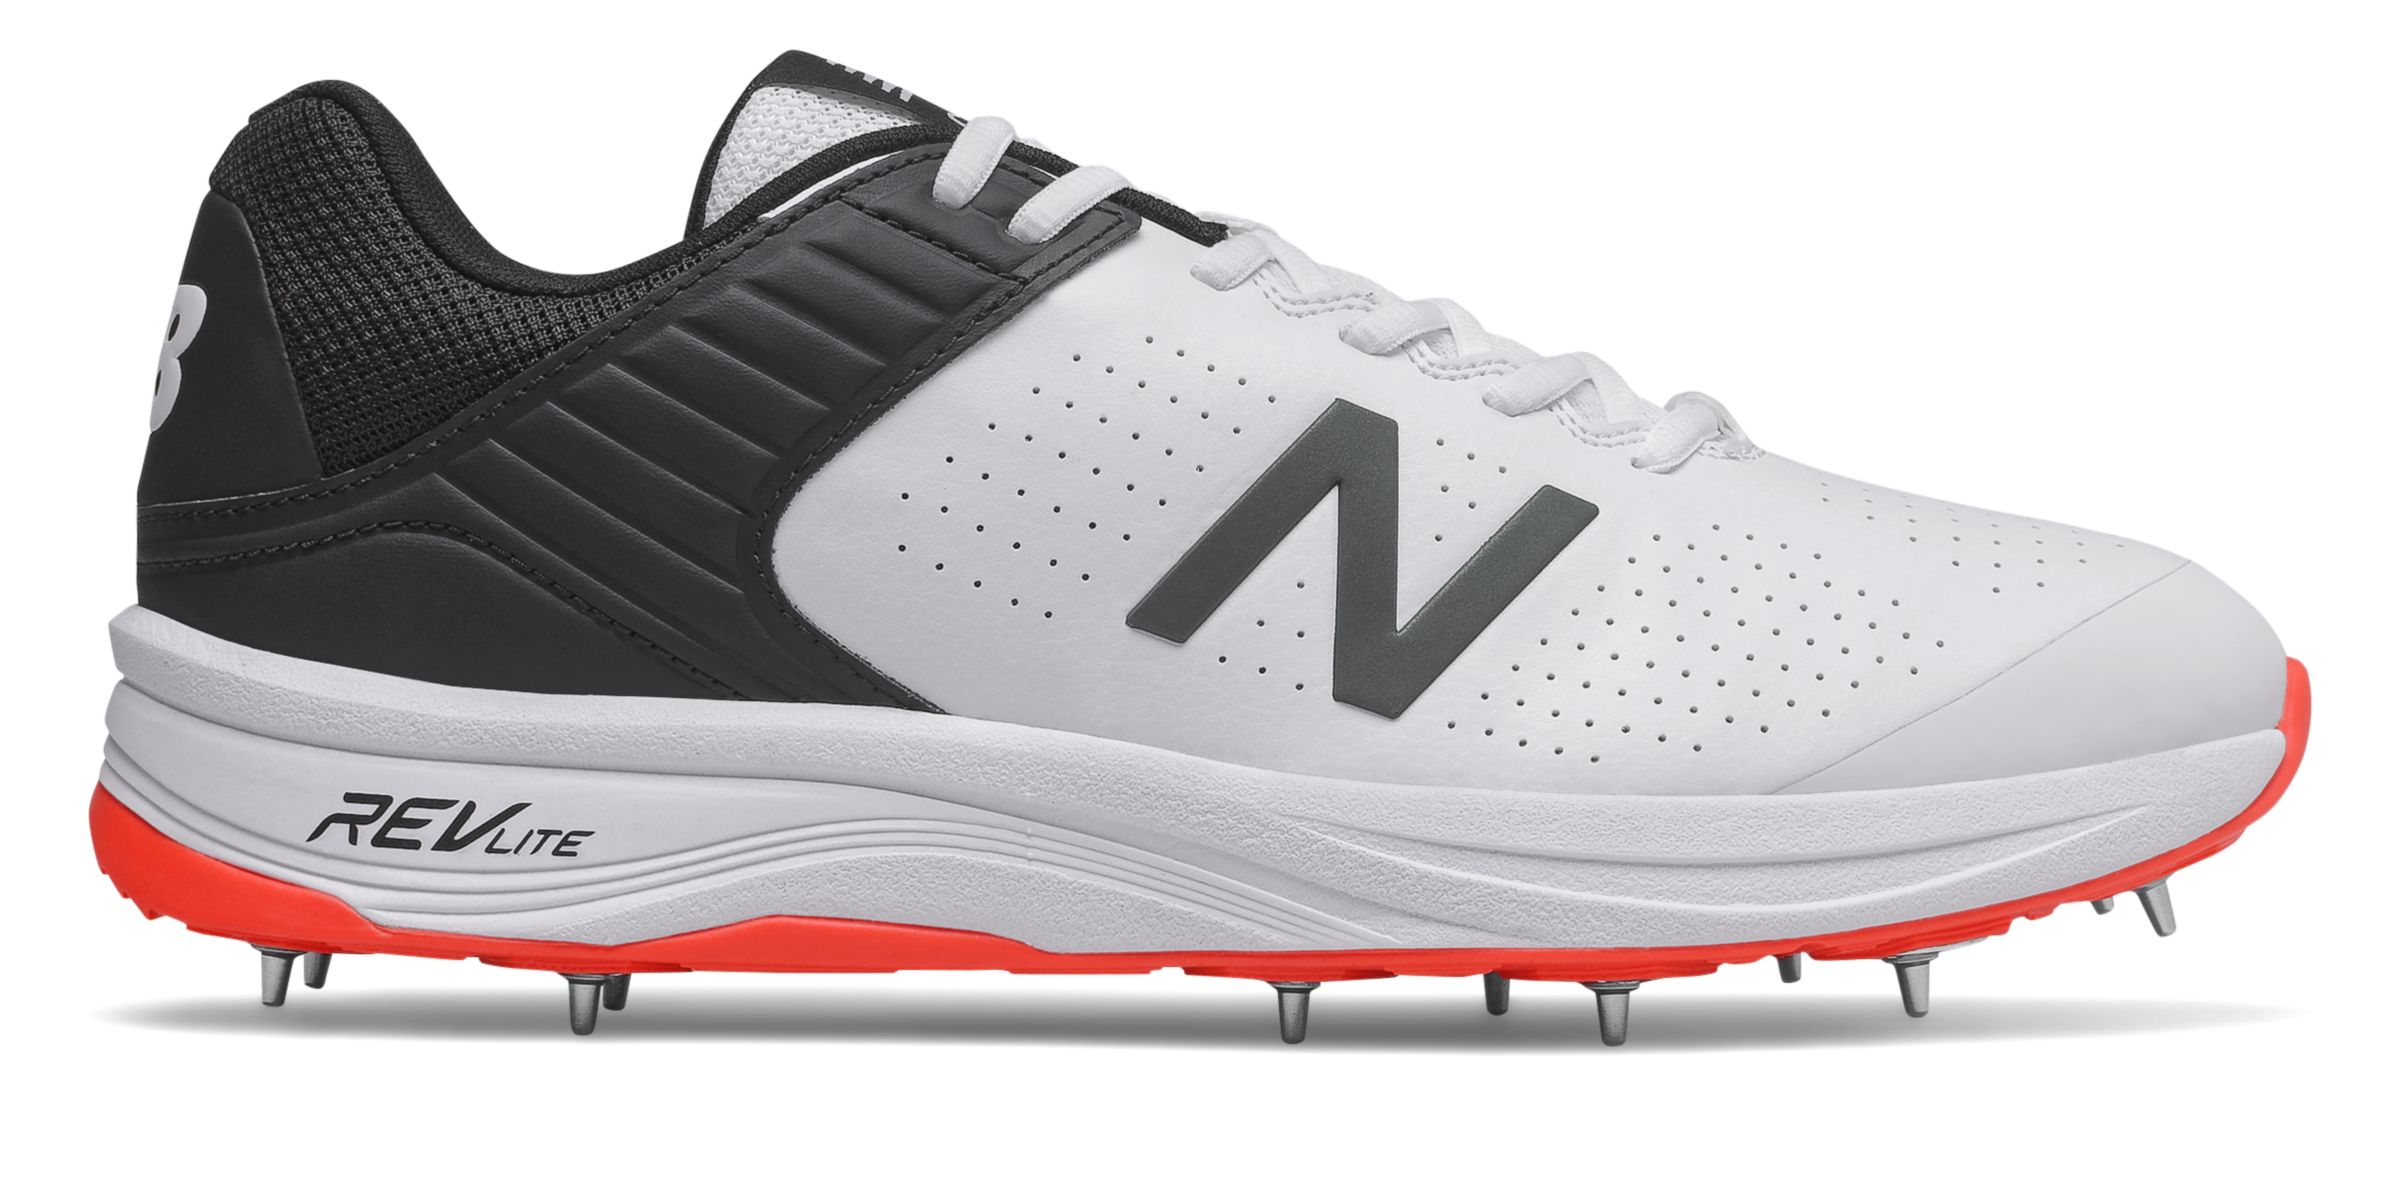 new balance cricket shoes online